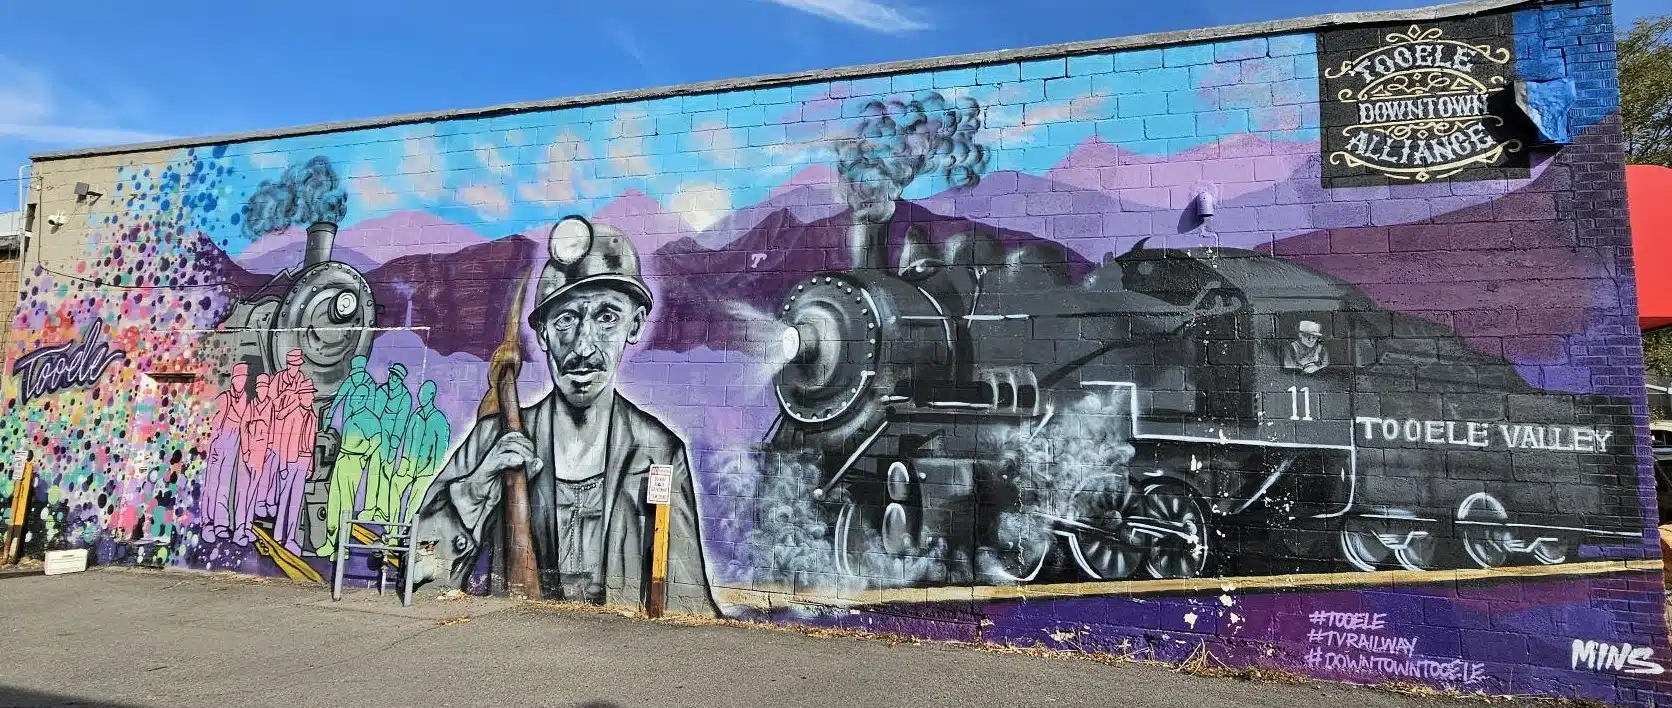 A building in Tooele UT with a mural painting of a train and construction workers